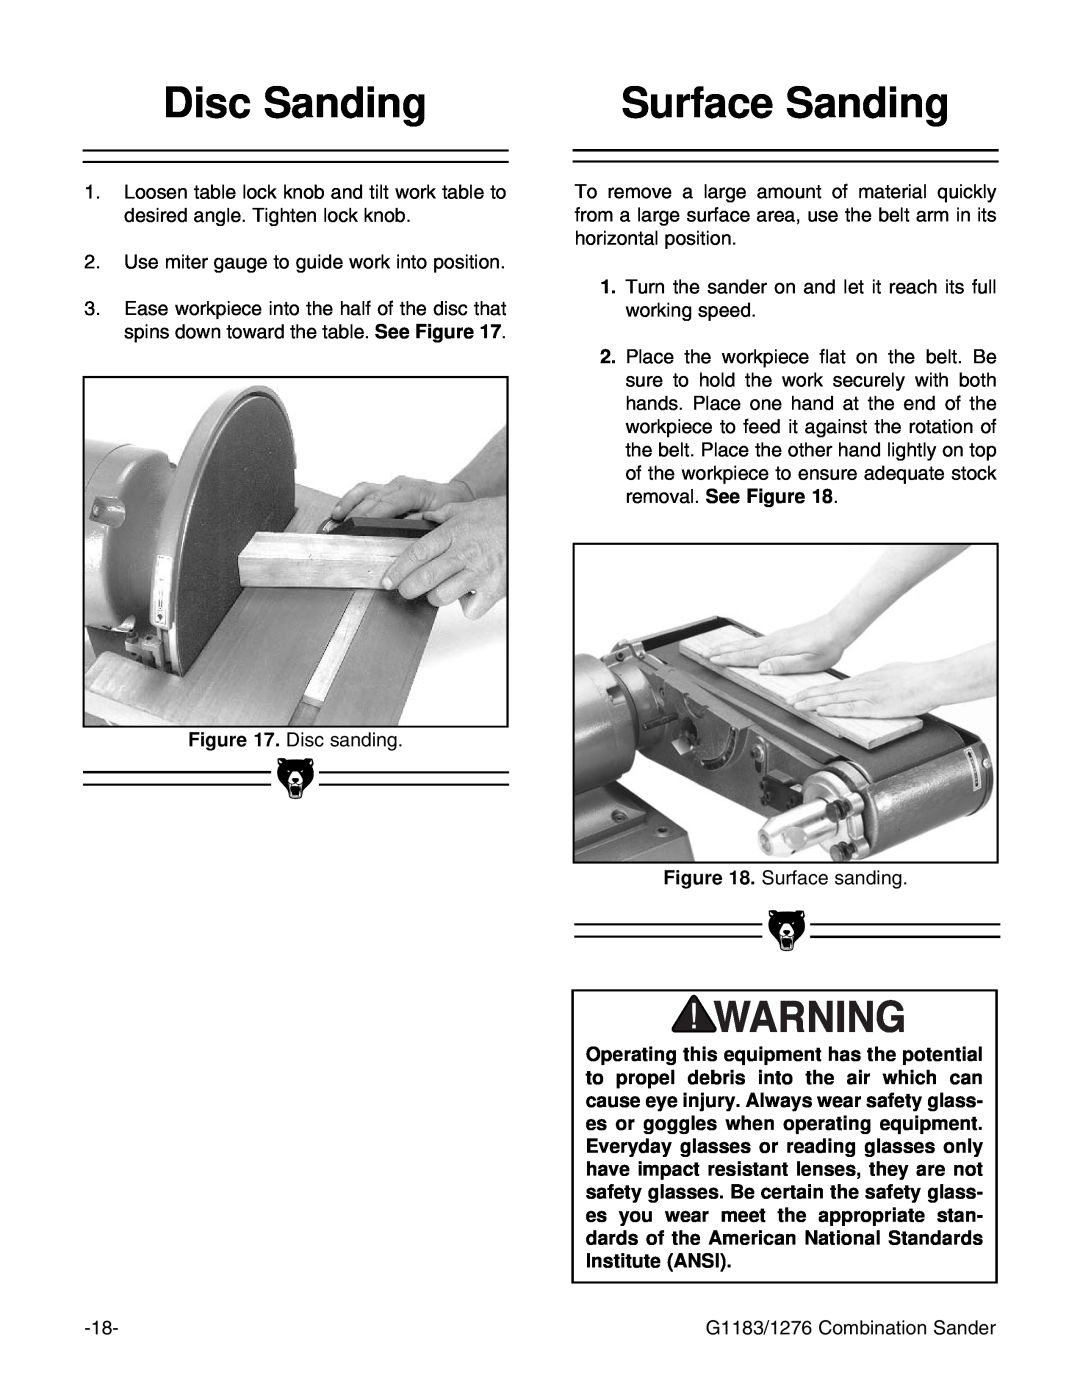 Grizzly G1183, G1276 instruction manual Disc Sanding, Surface Sanding 